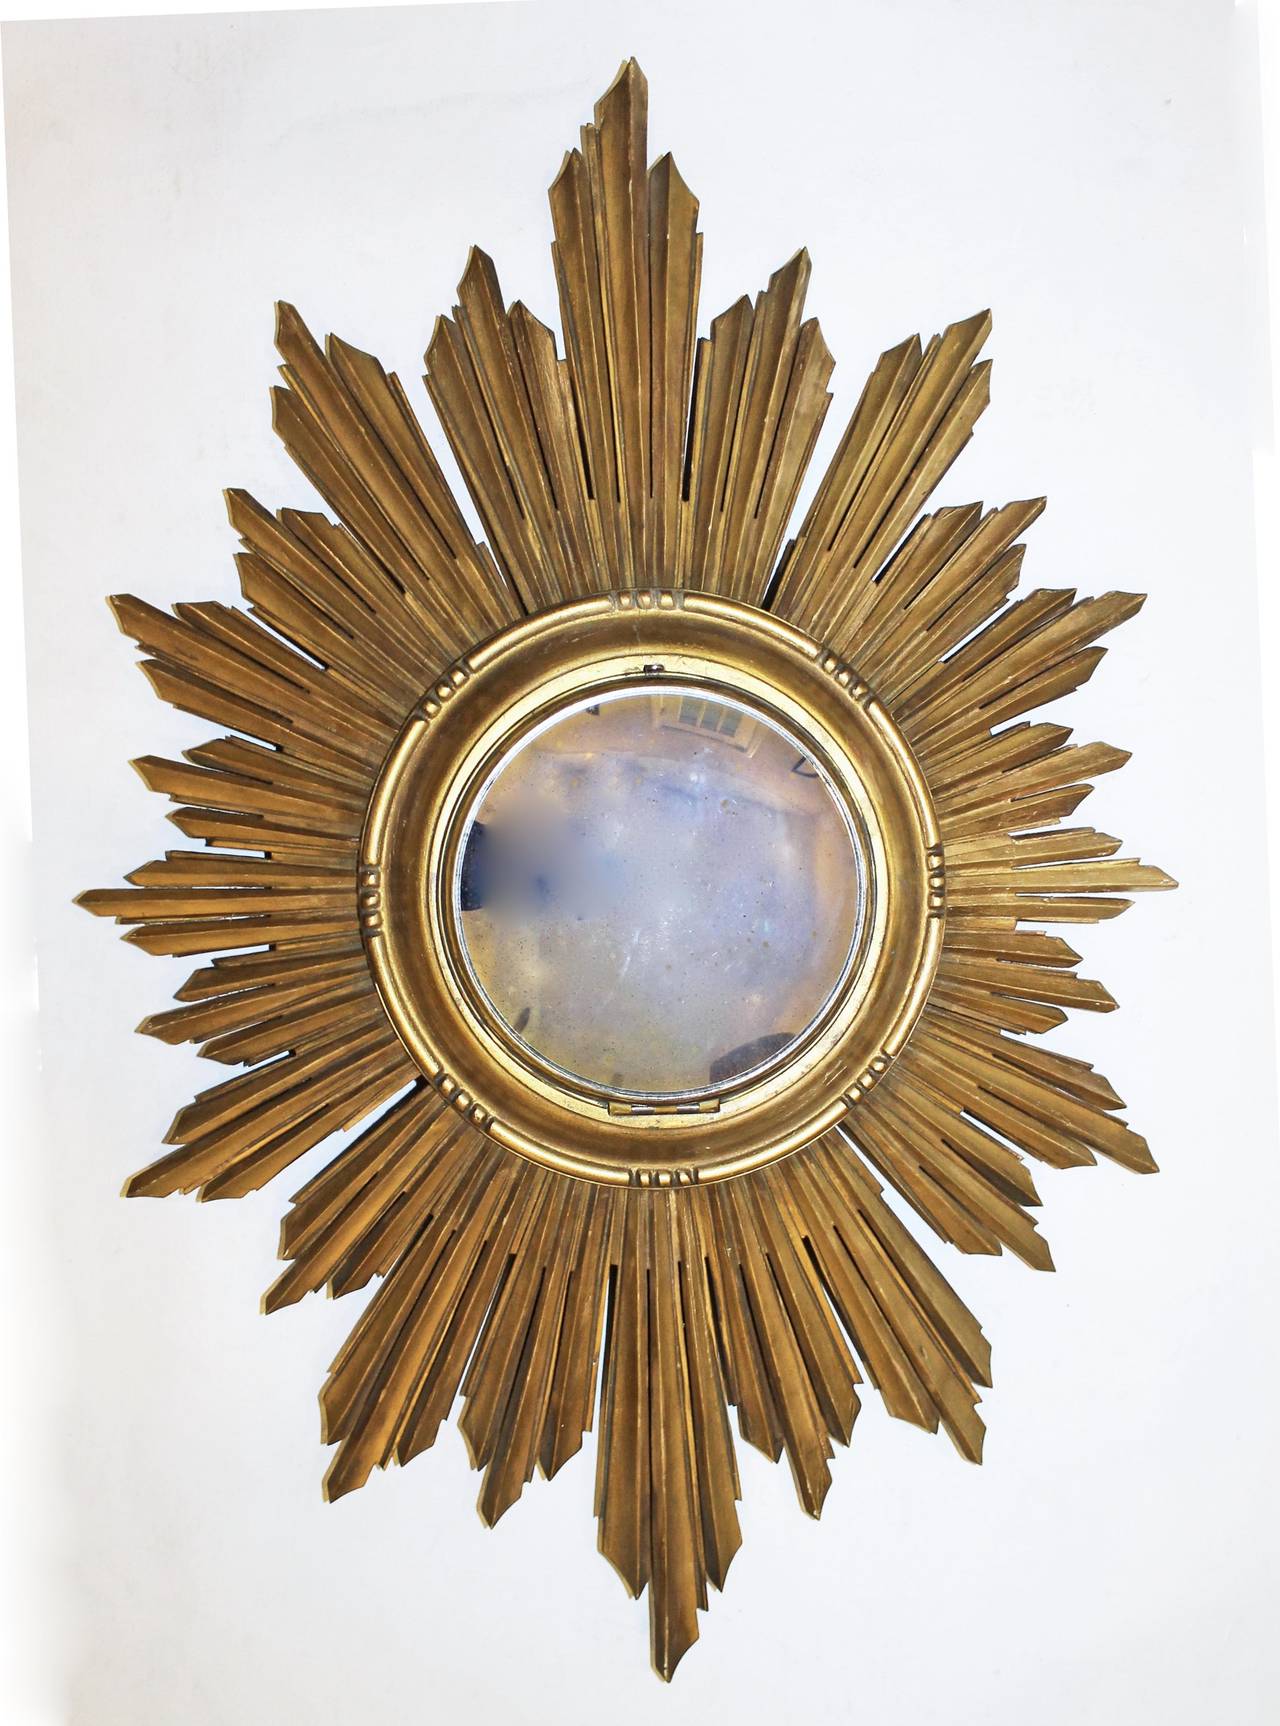 French, 1940s soleil gilt gold paint wood carved wall mirror with convex inset mirror.